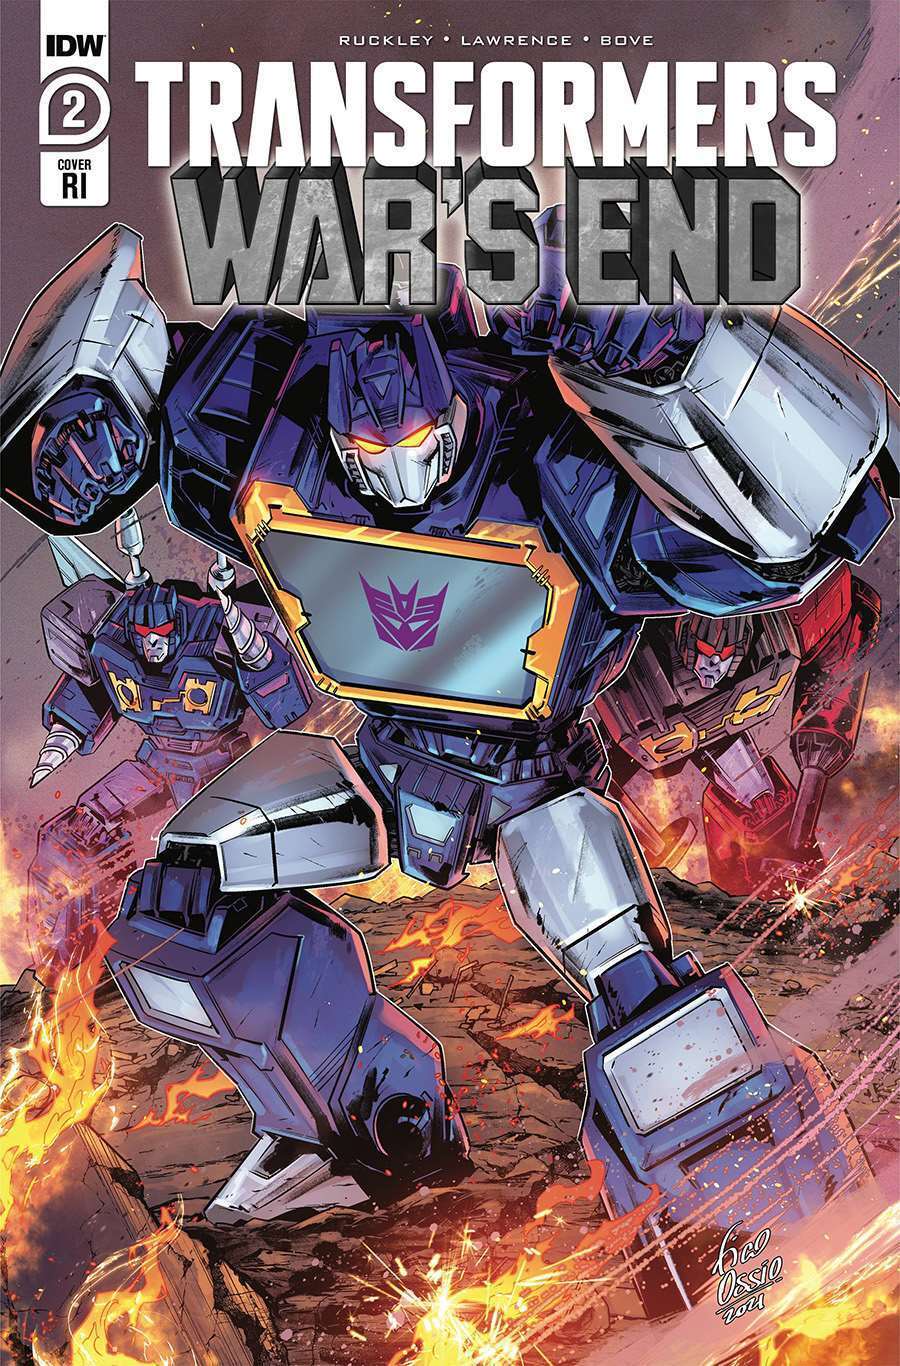 Transformers: War\'s End #2C VF/NM; IDW | RI 1:10 variant - we combine shipping